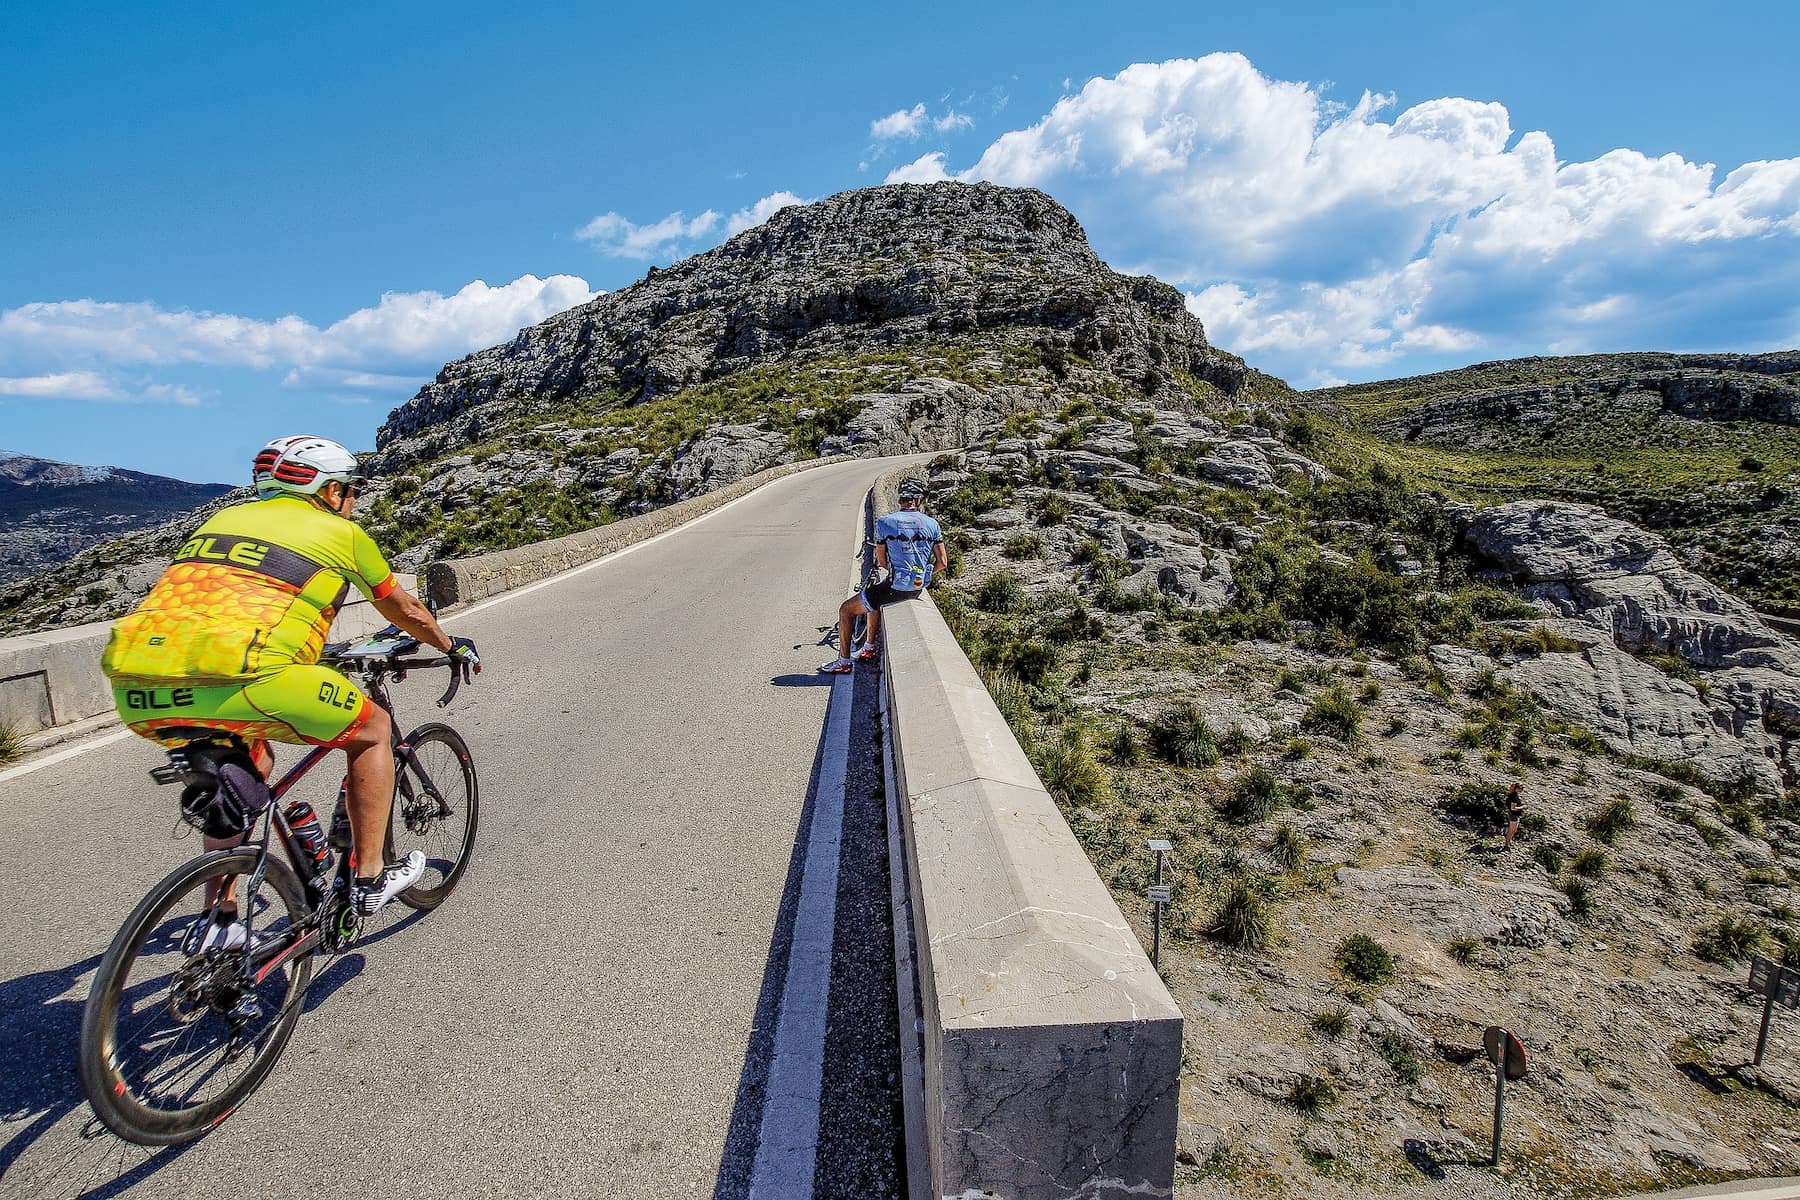 Cycle route from Pollensa to Sa Calobra: Everything you need to know